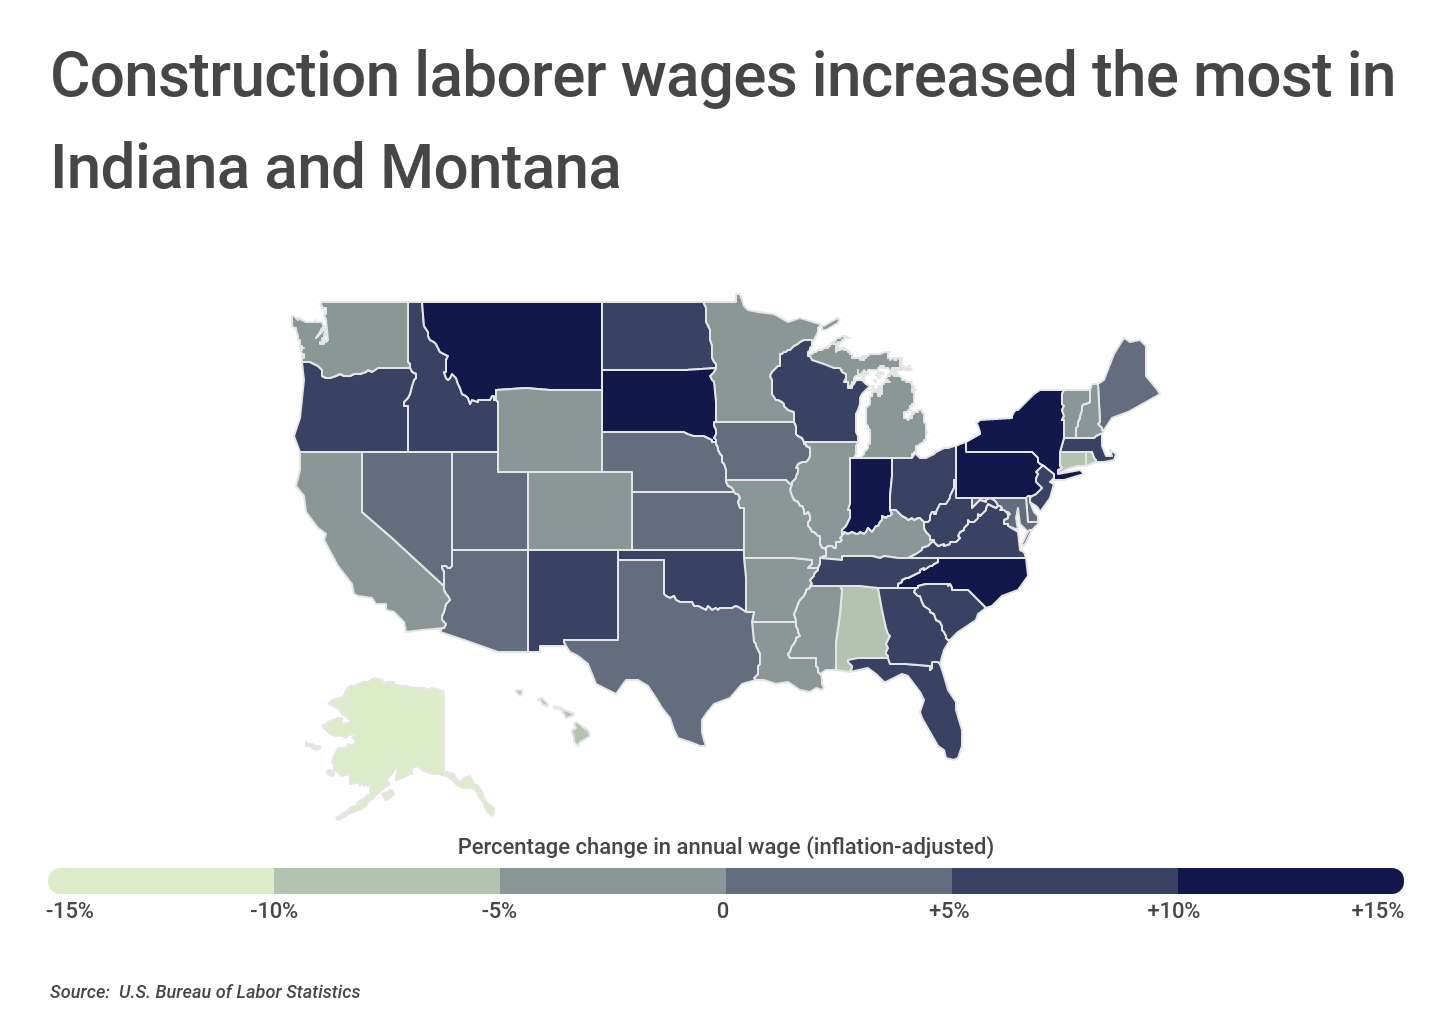 Chart3_Construction laborer wages increased the most in Indiana and Montana